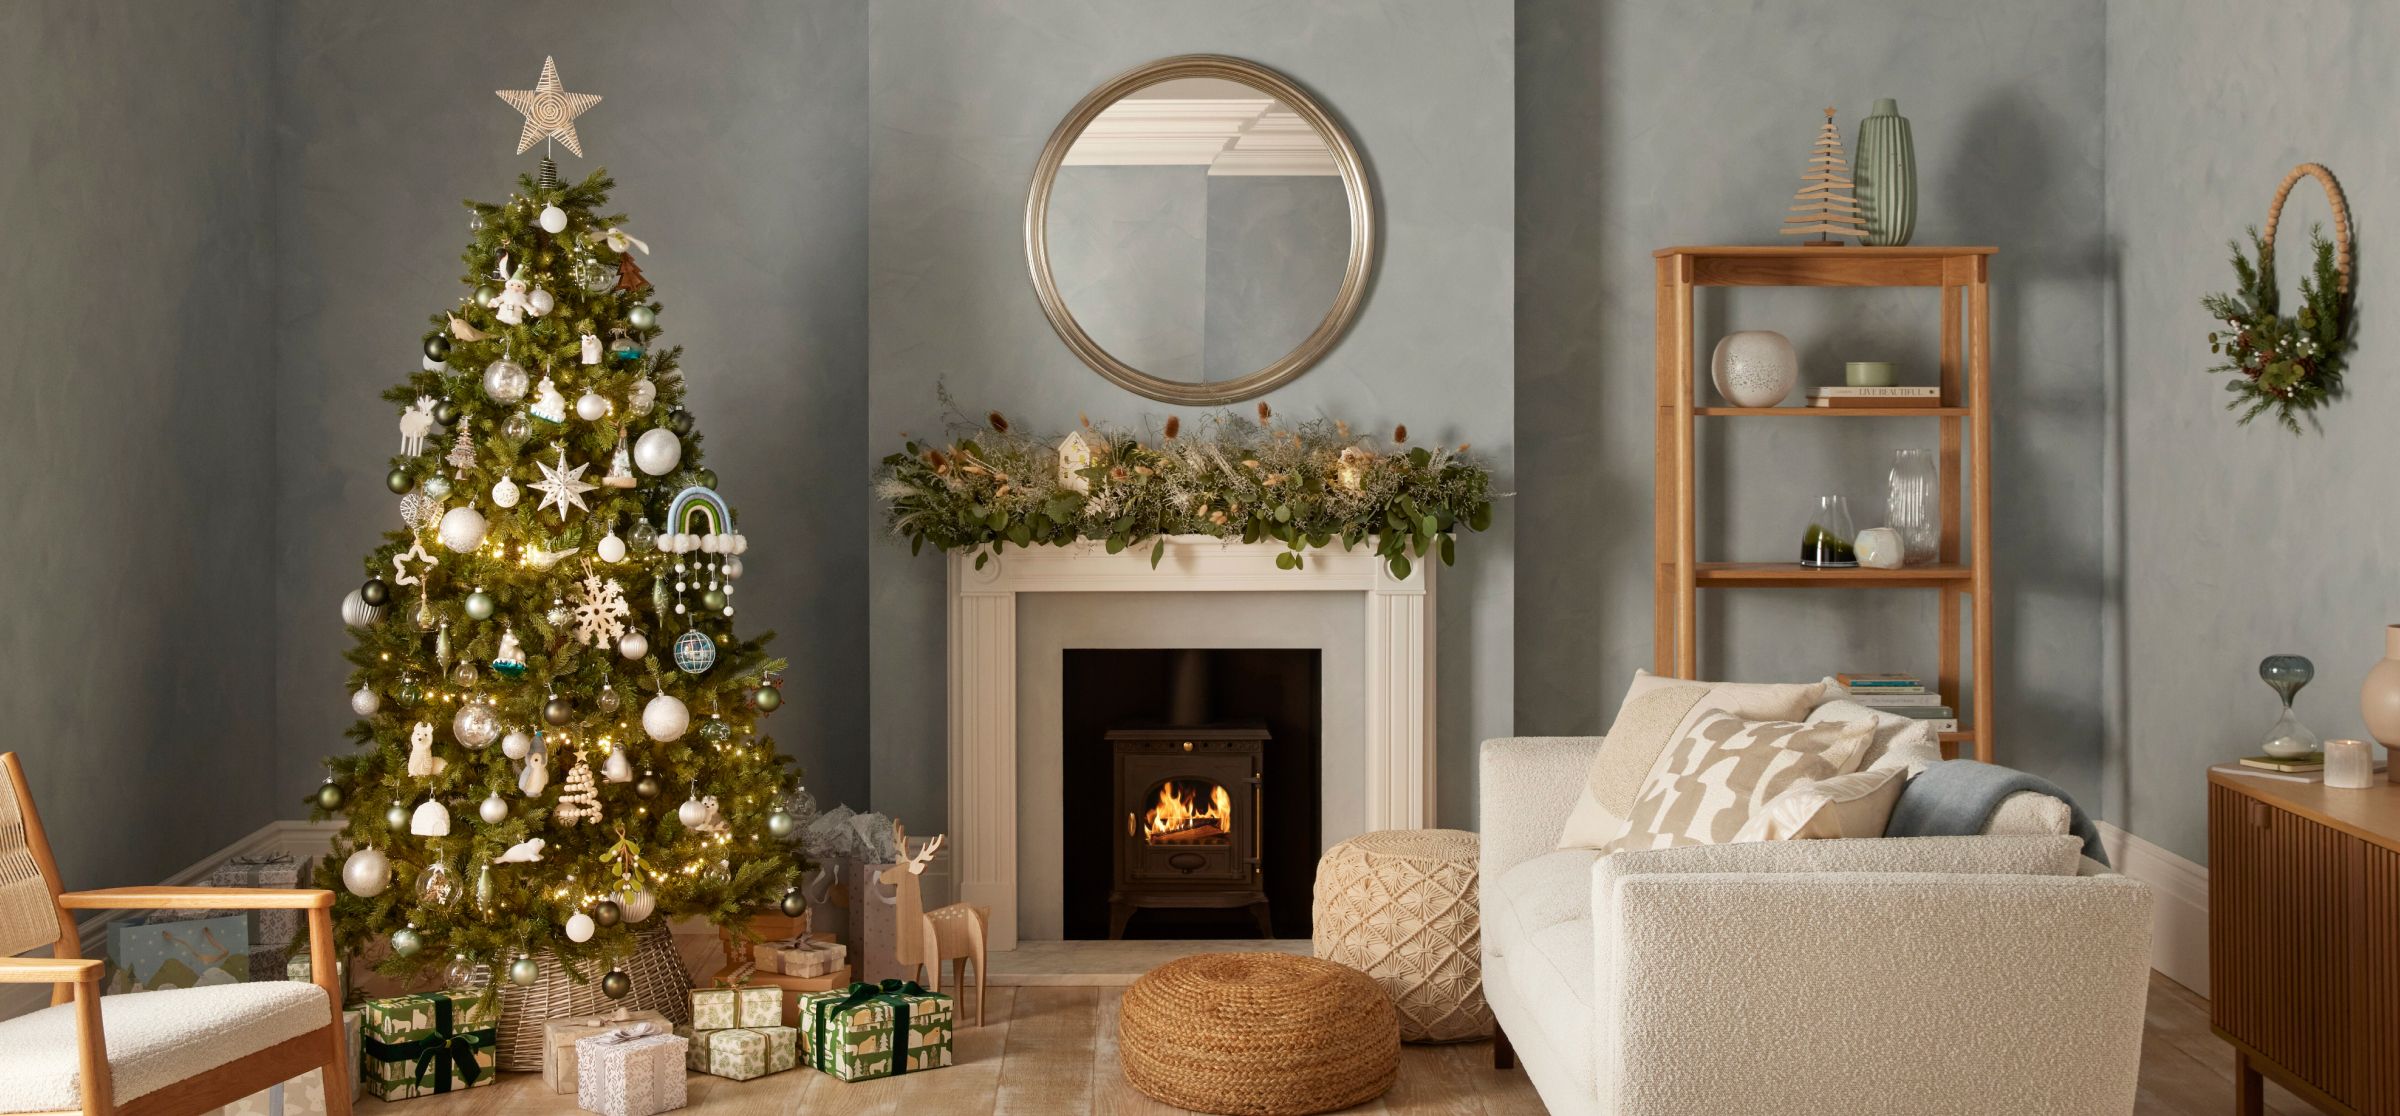 John Lewis & Partners Christams Decorating Ideas and Trends: Polar Planet